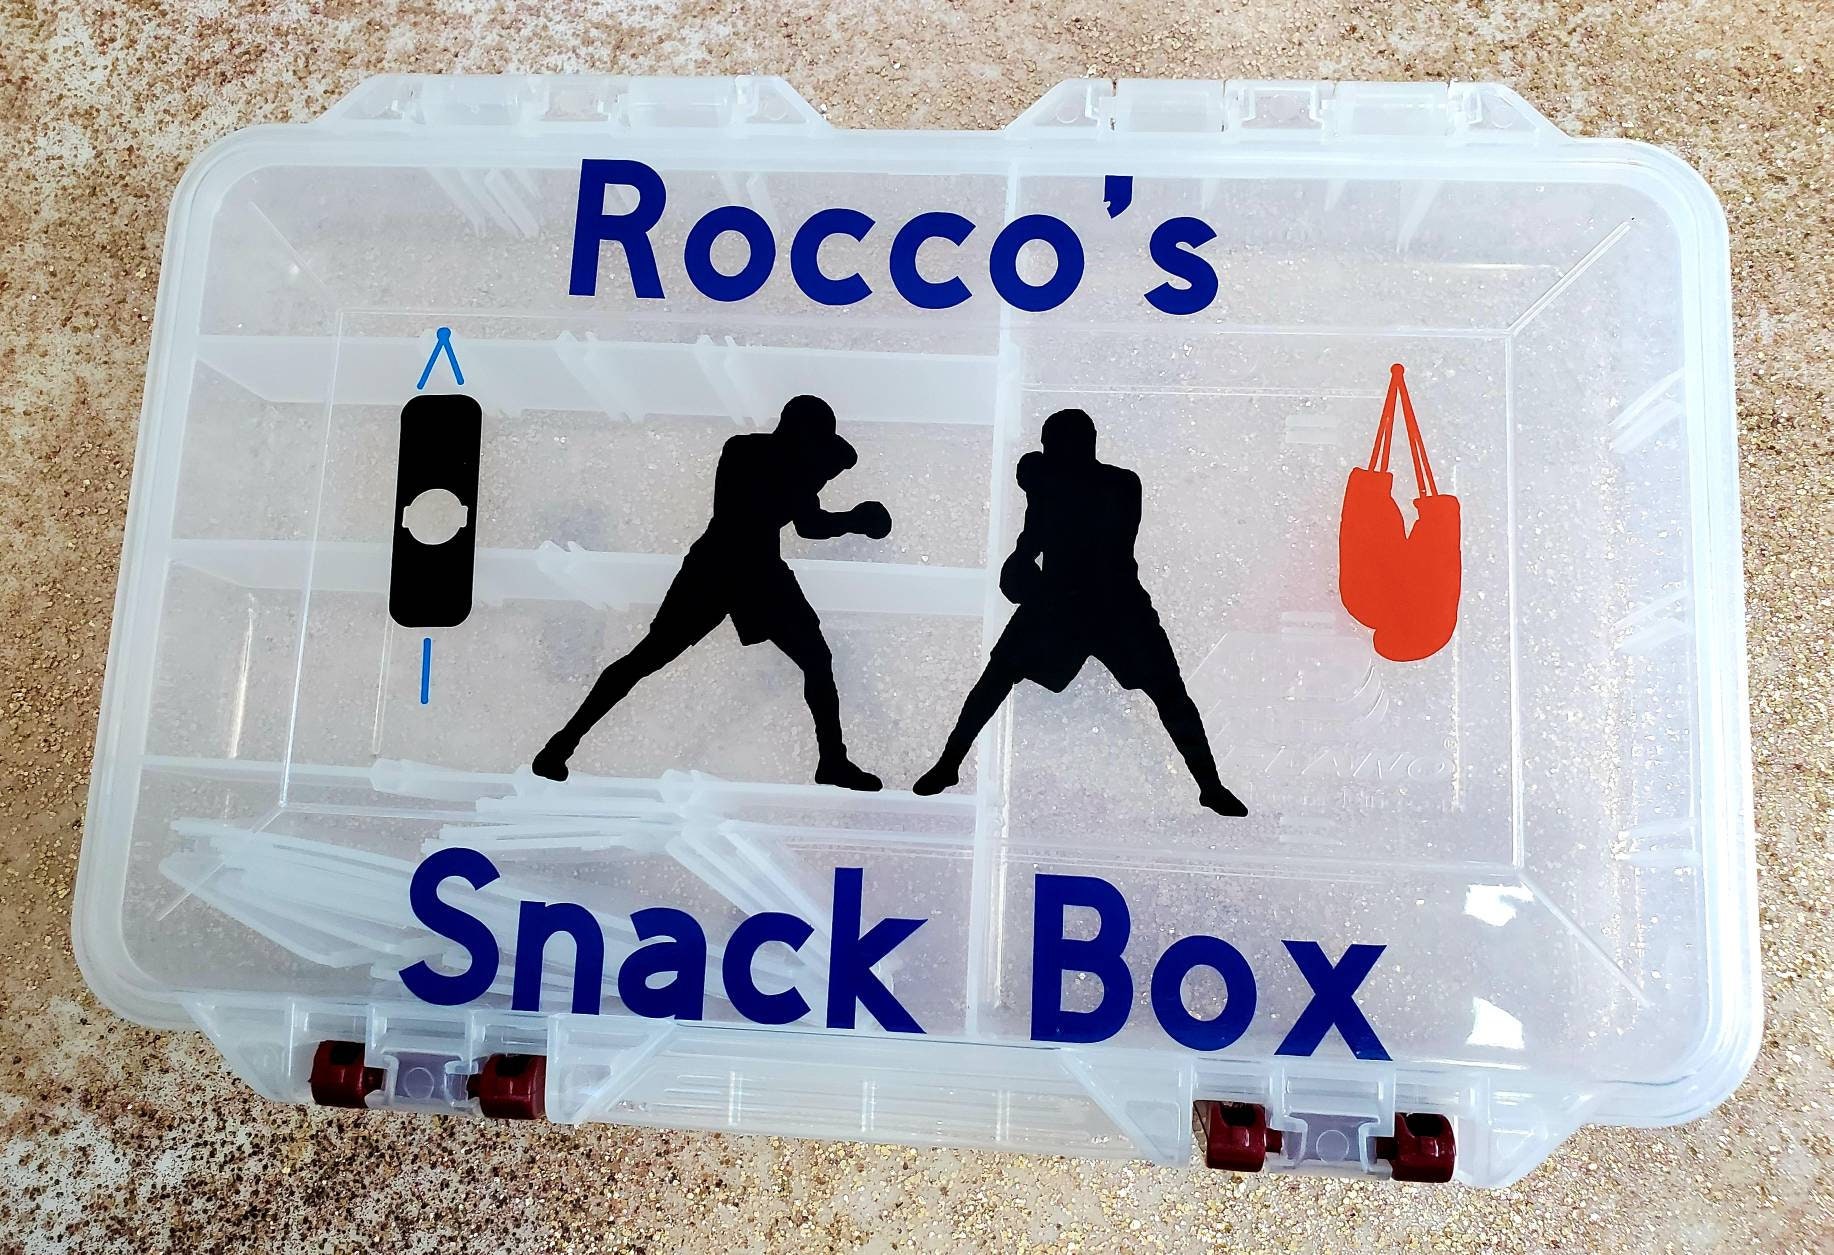 Customized Snack Box Sports Boxing Personalized Snackle Box Rocky